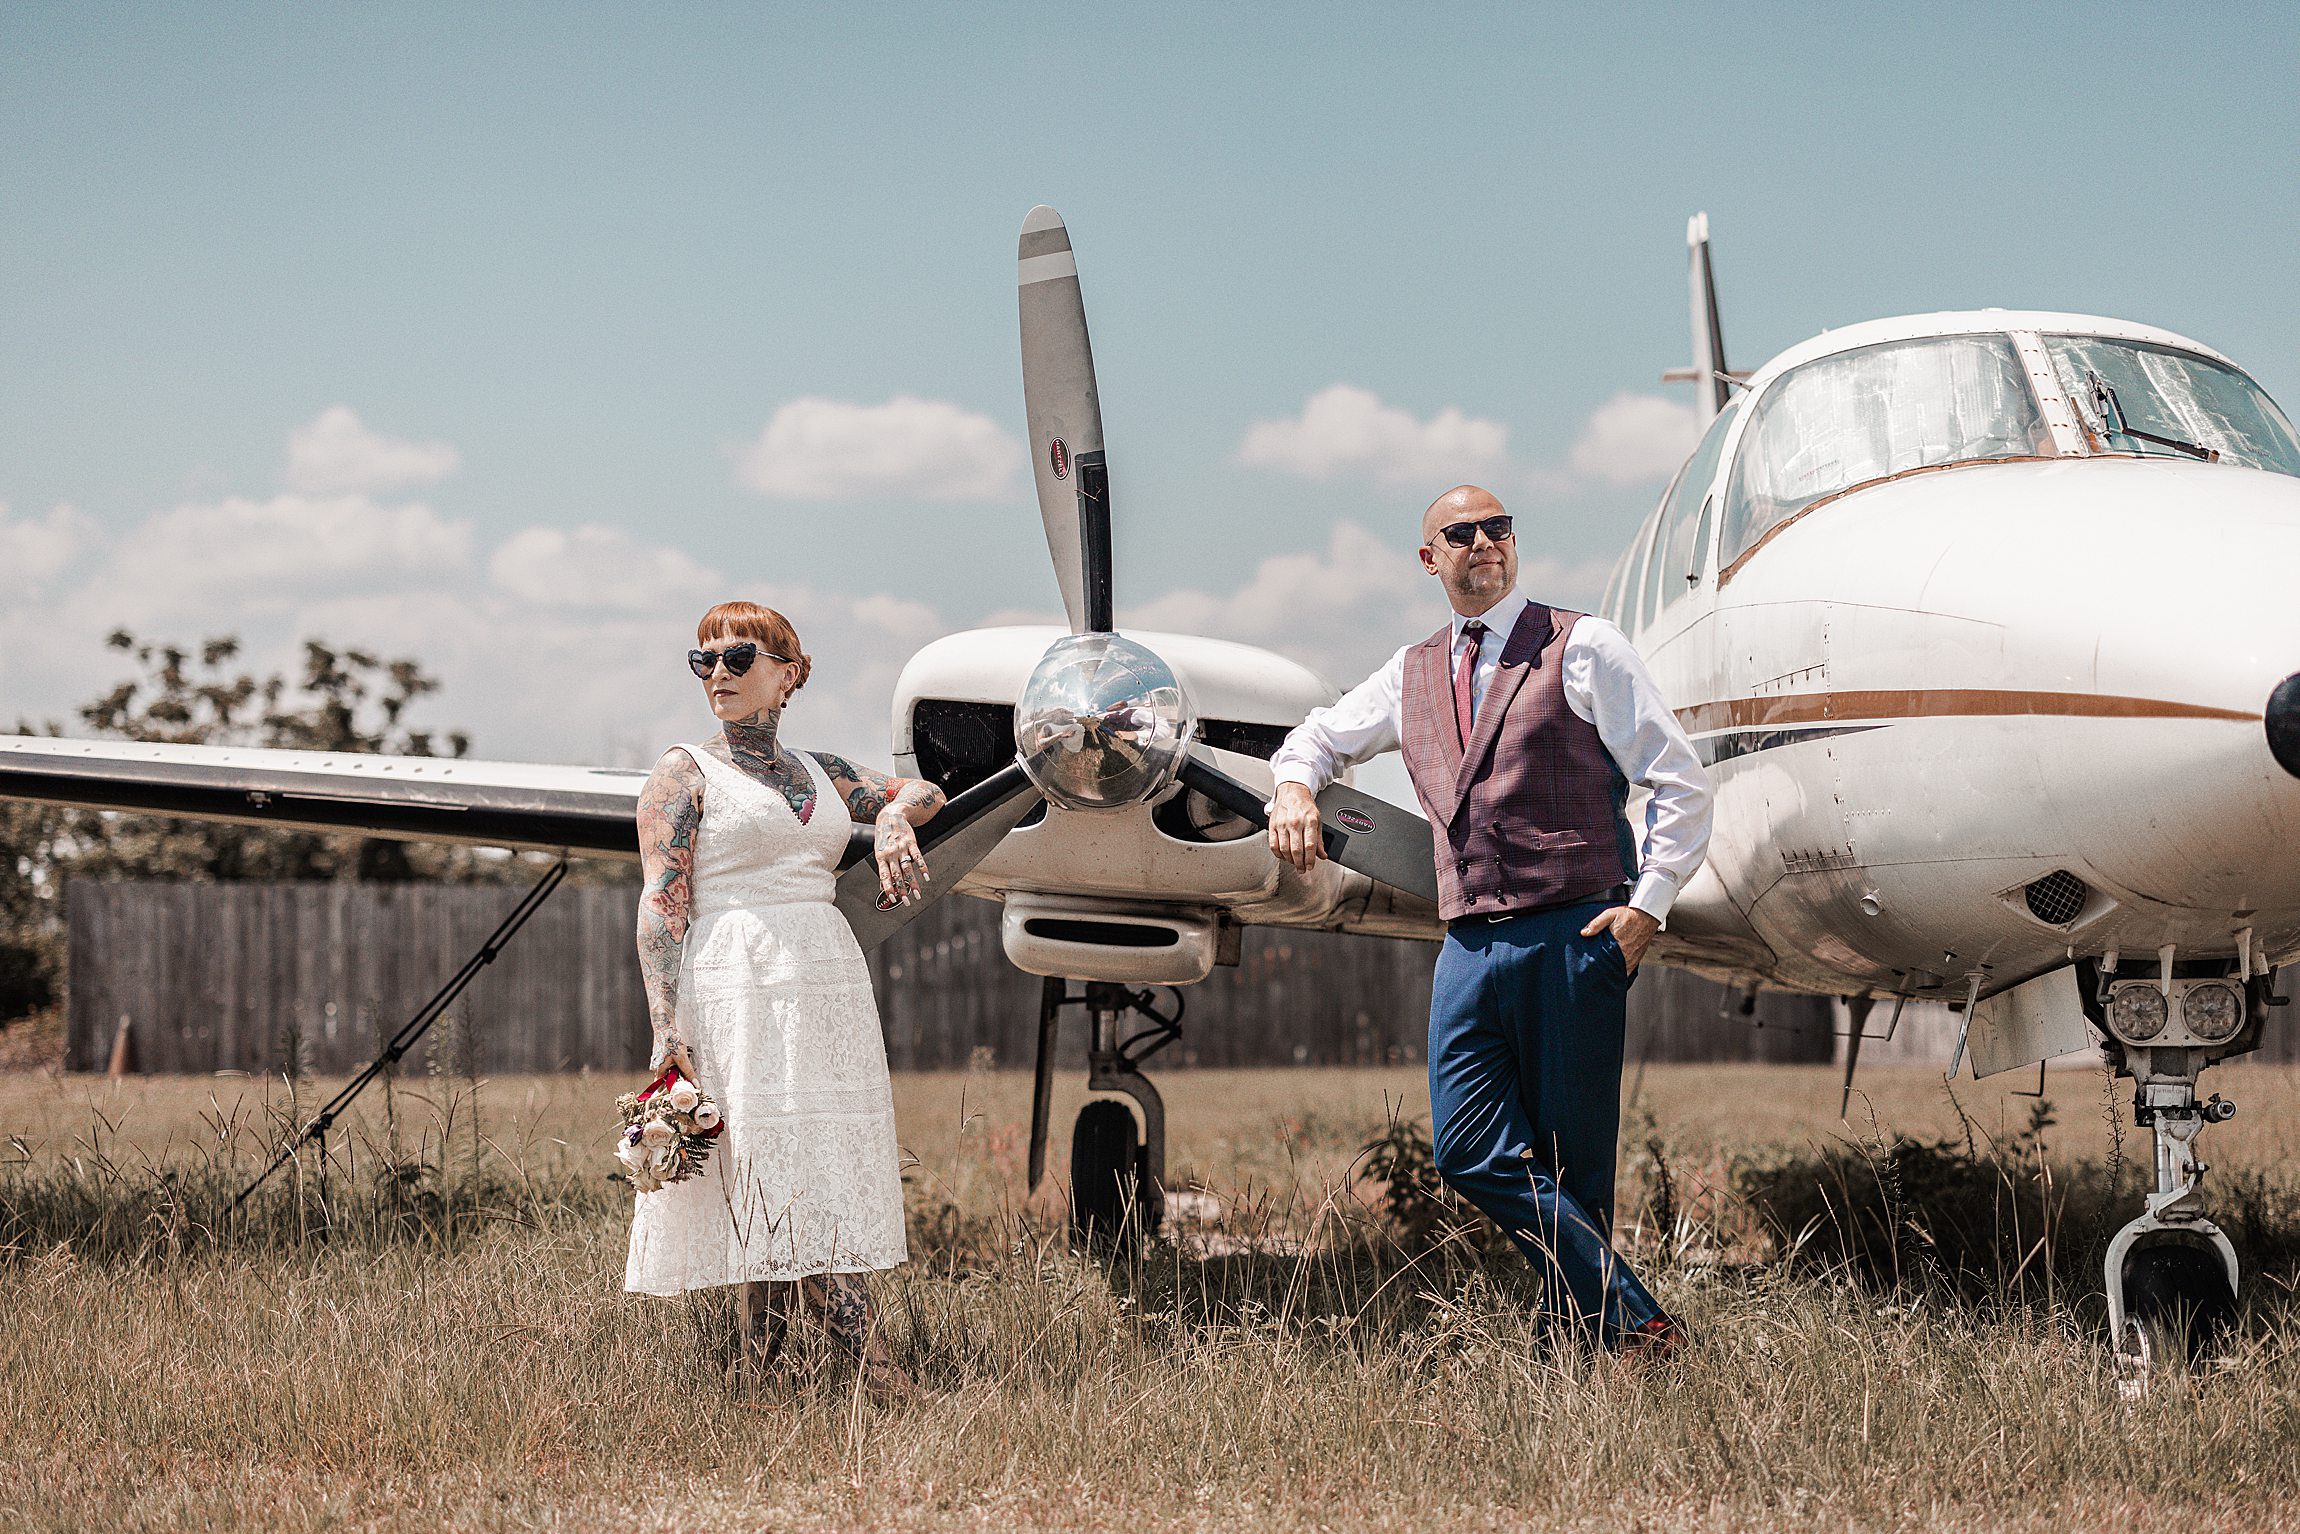 A newly married couple stand in front of a small private plane during their wedding reception at the orlando apopka airport.